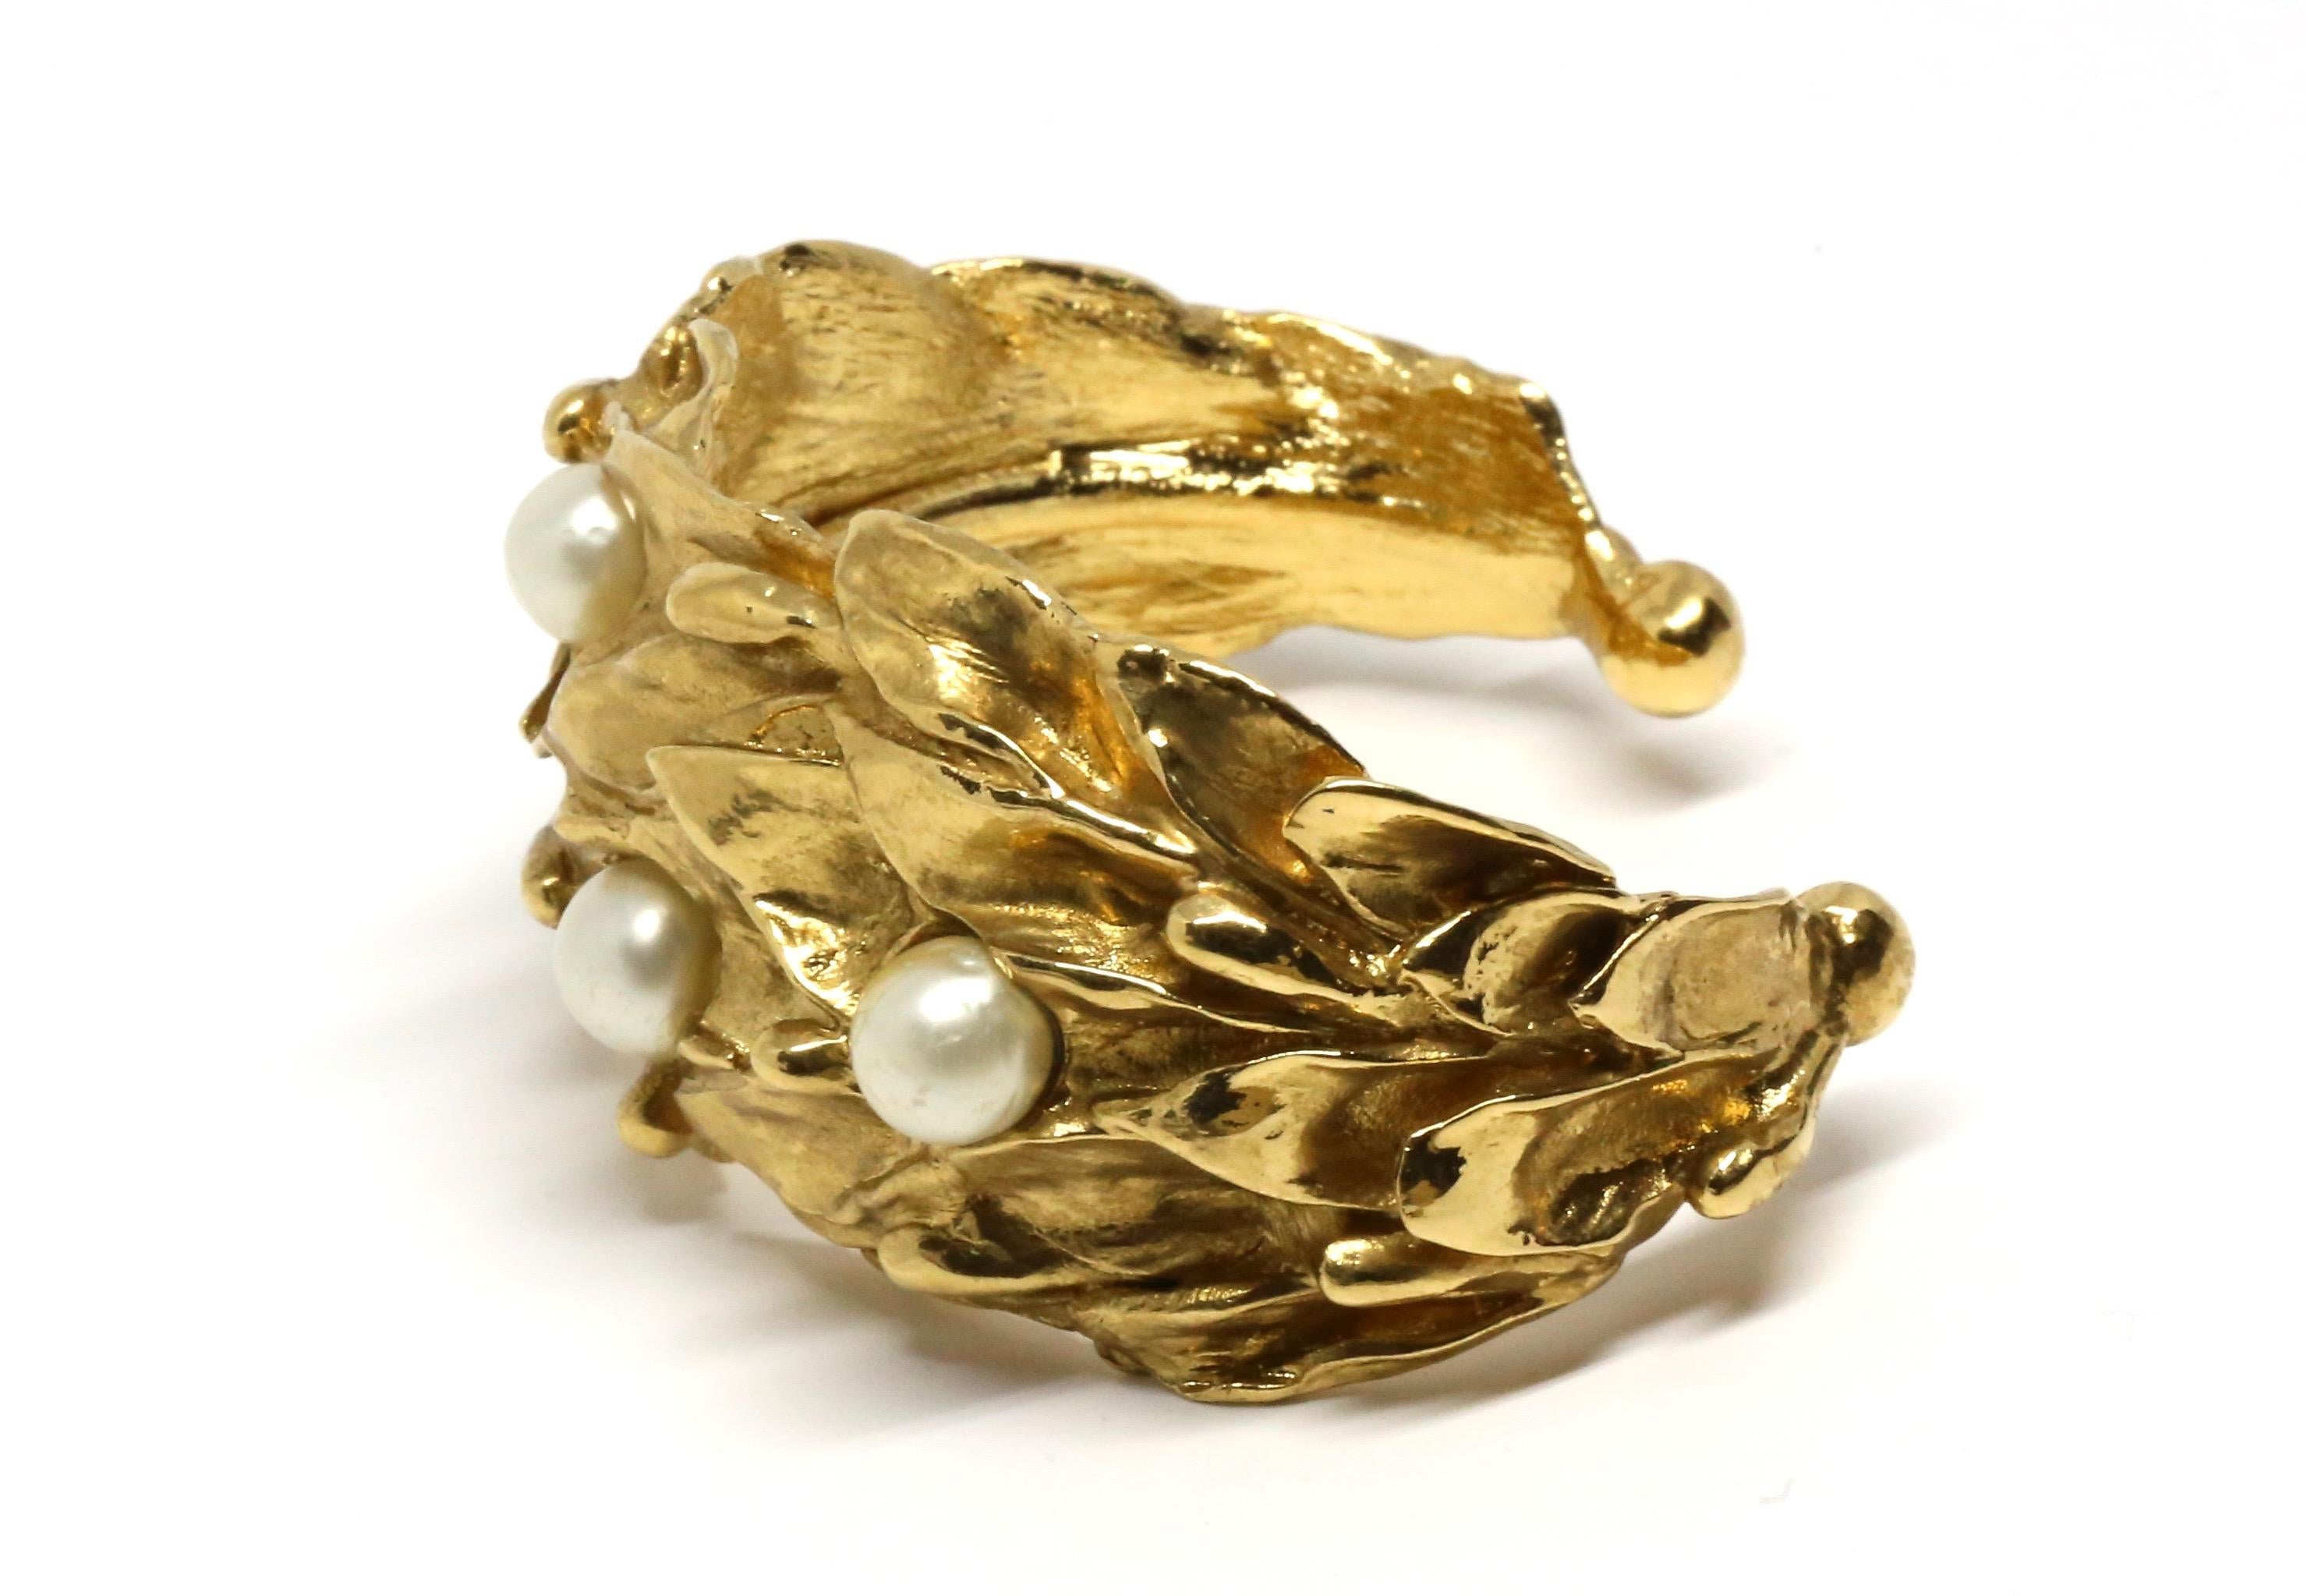 Organically shaped gilt cuff with faux pearls from Yves Saint Laurent dating to the 1980's. Fits a small/medium wrist.  Interior measurements are very difficult to take, however the cuff fits loosely on a 6